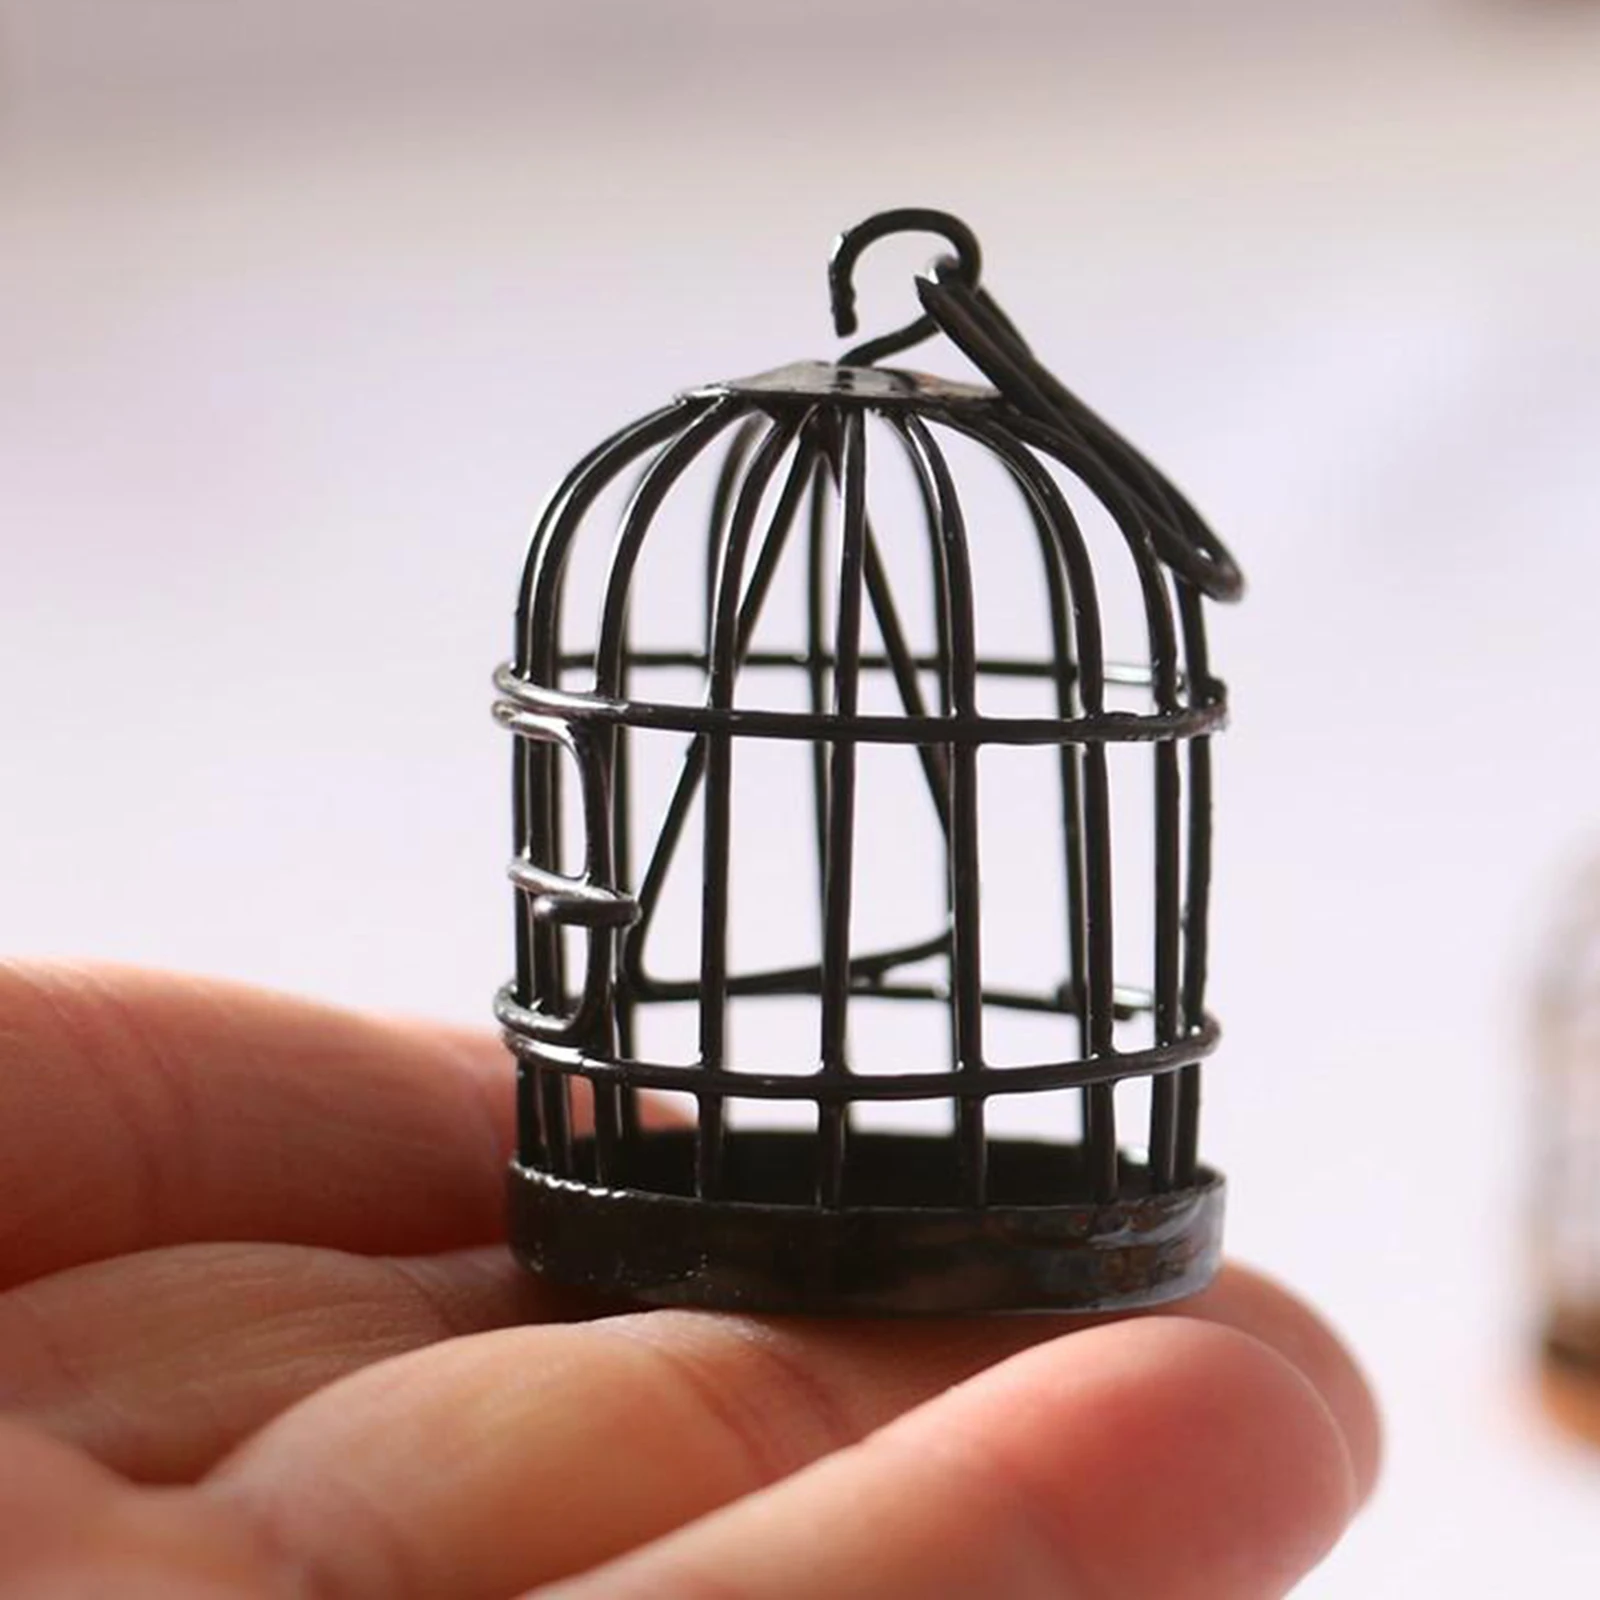 1:12 Scale Doll House Miniature,Black Metal Alloy Birdcage,Simulation Living Room Furniture Supplies,Scenery Decoration